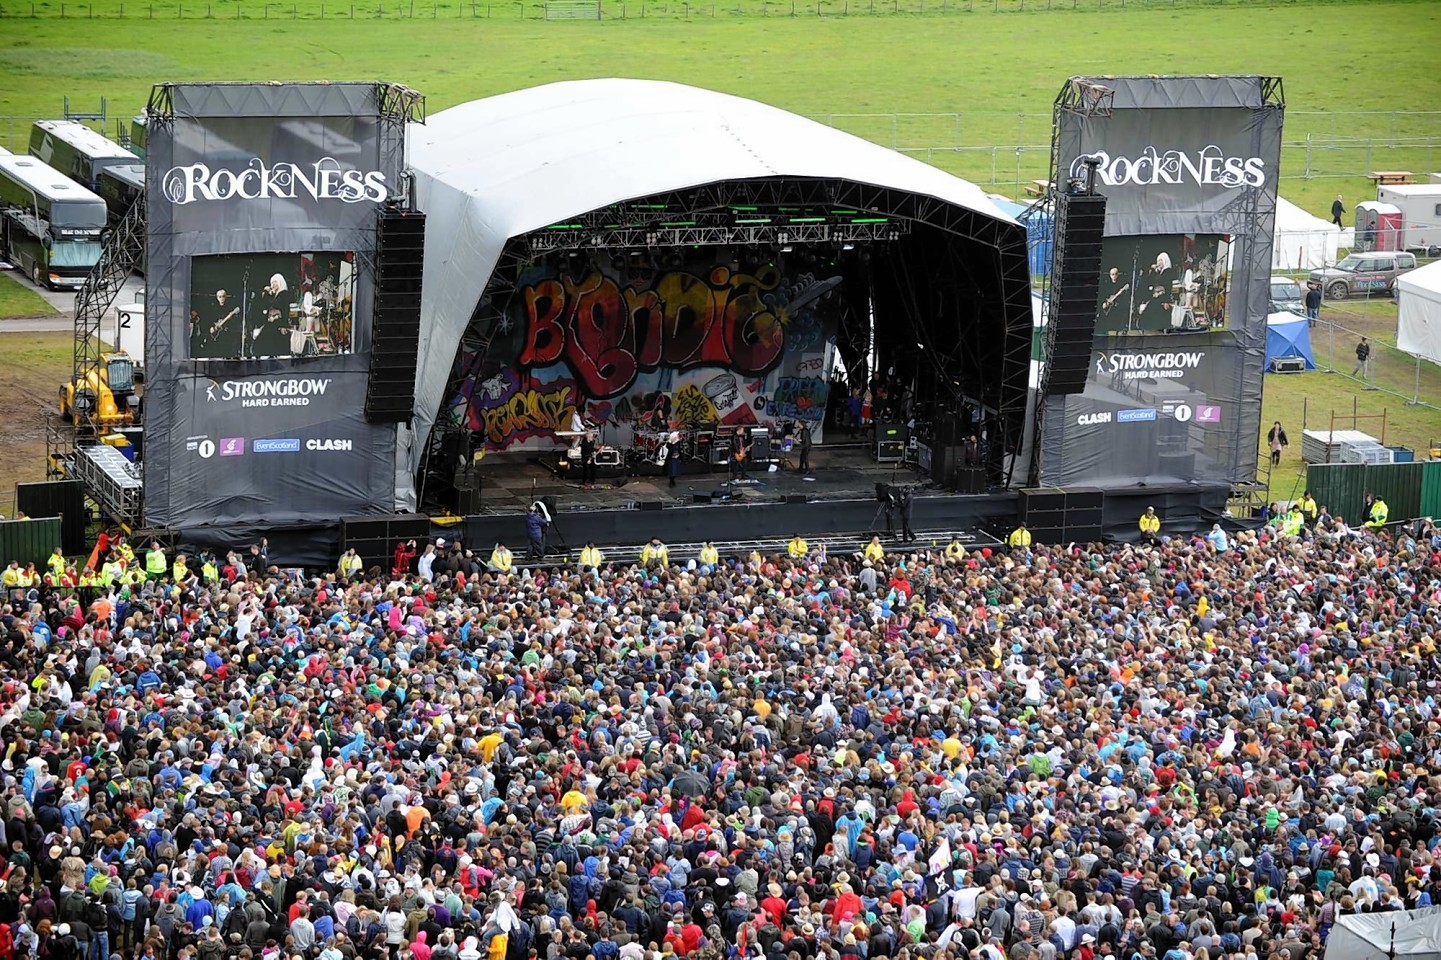 The new event could be held at the former Rockness site